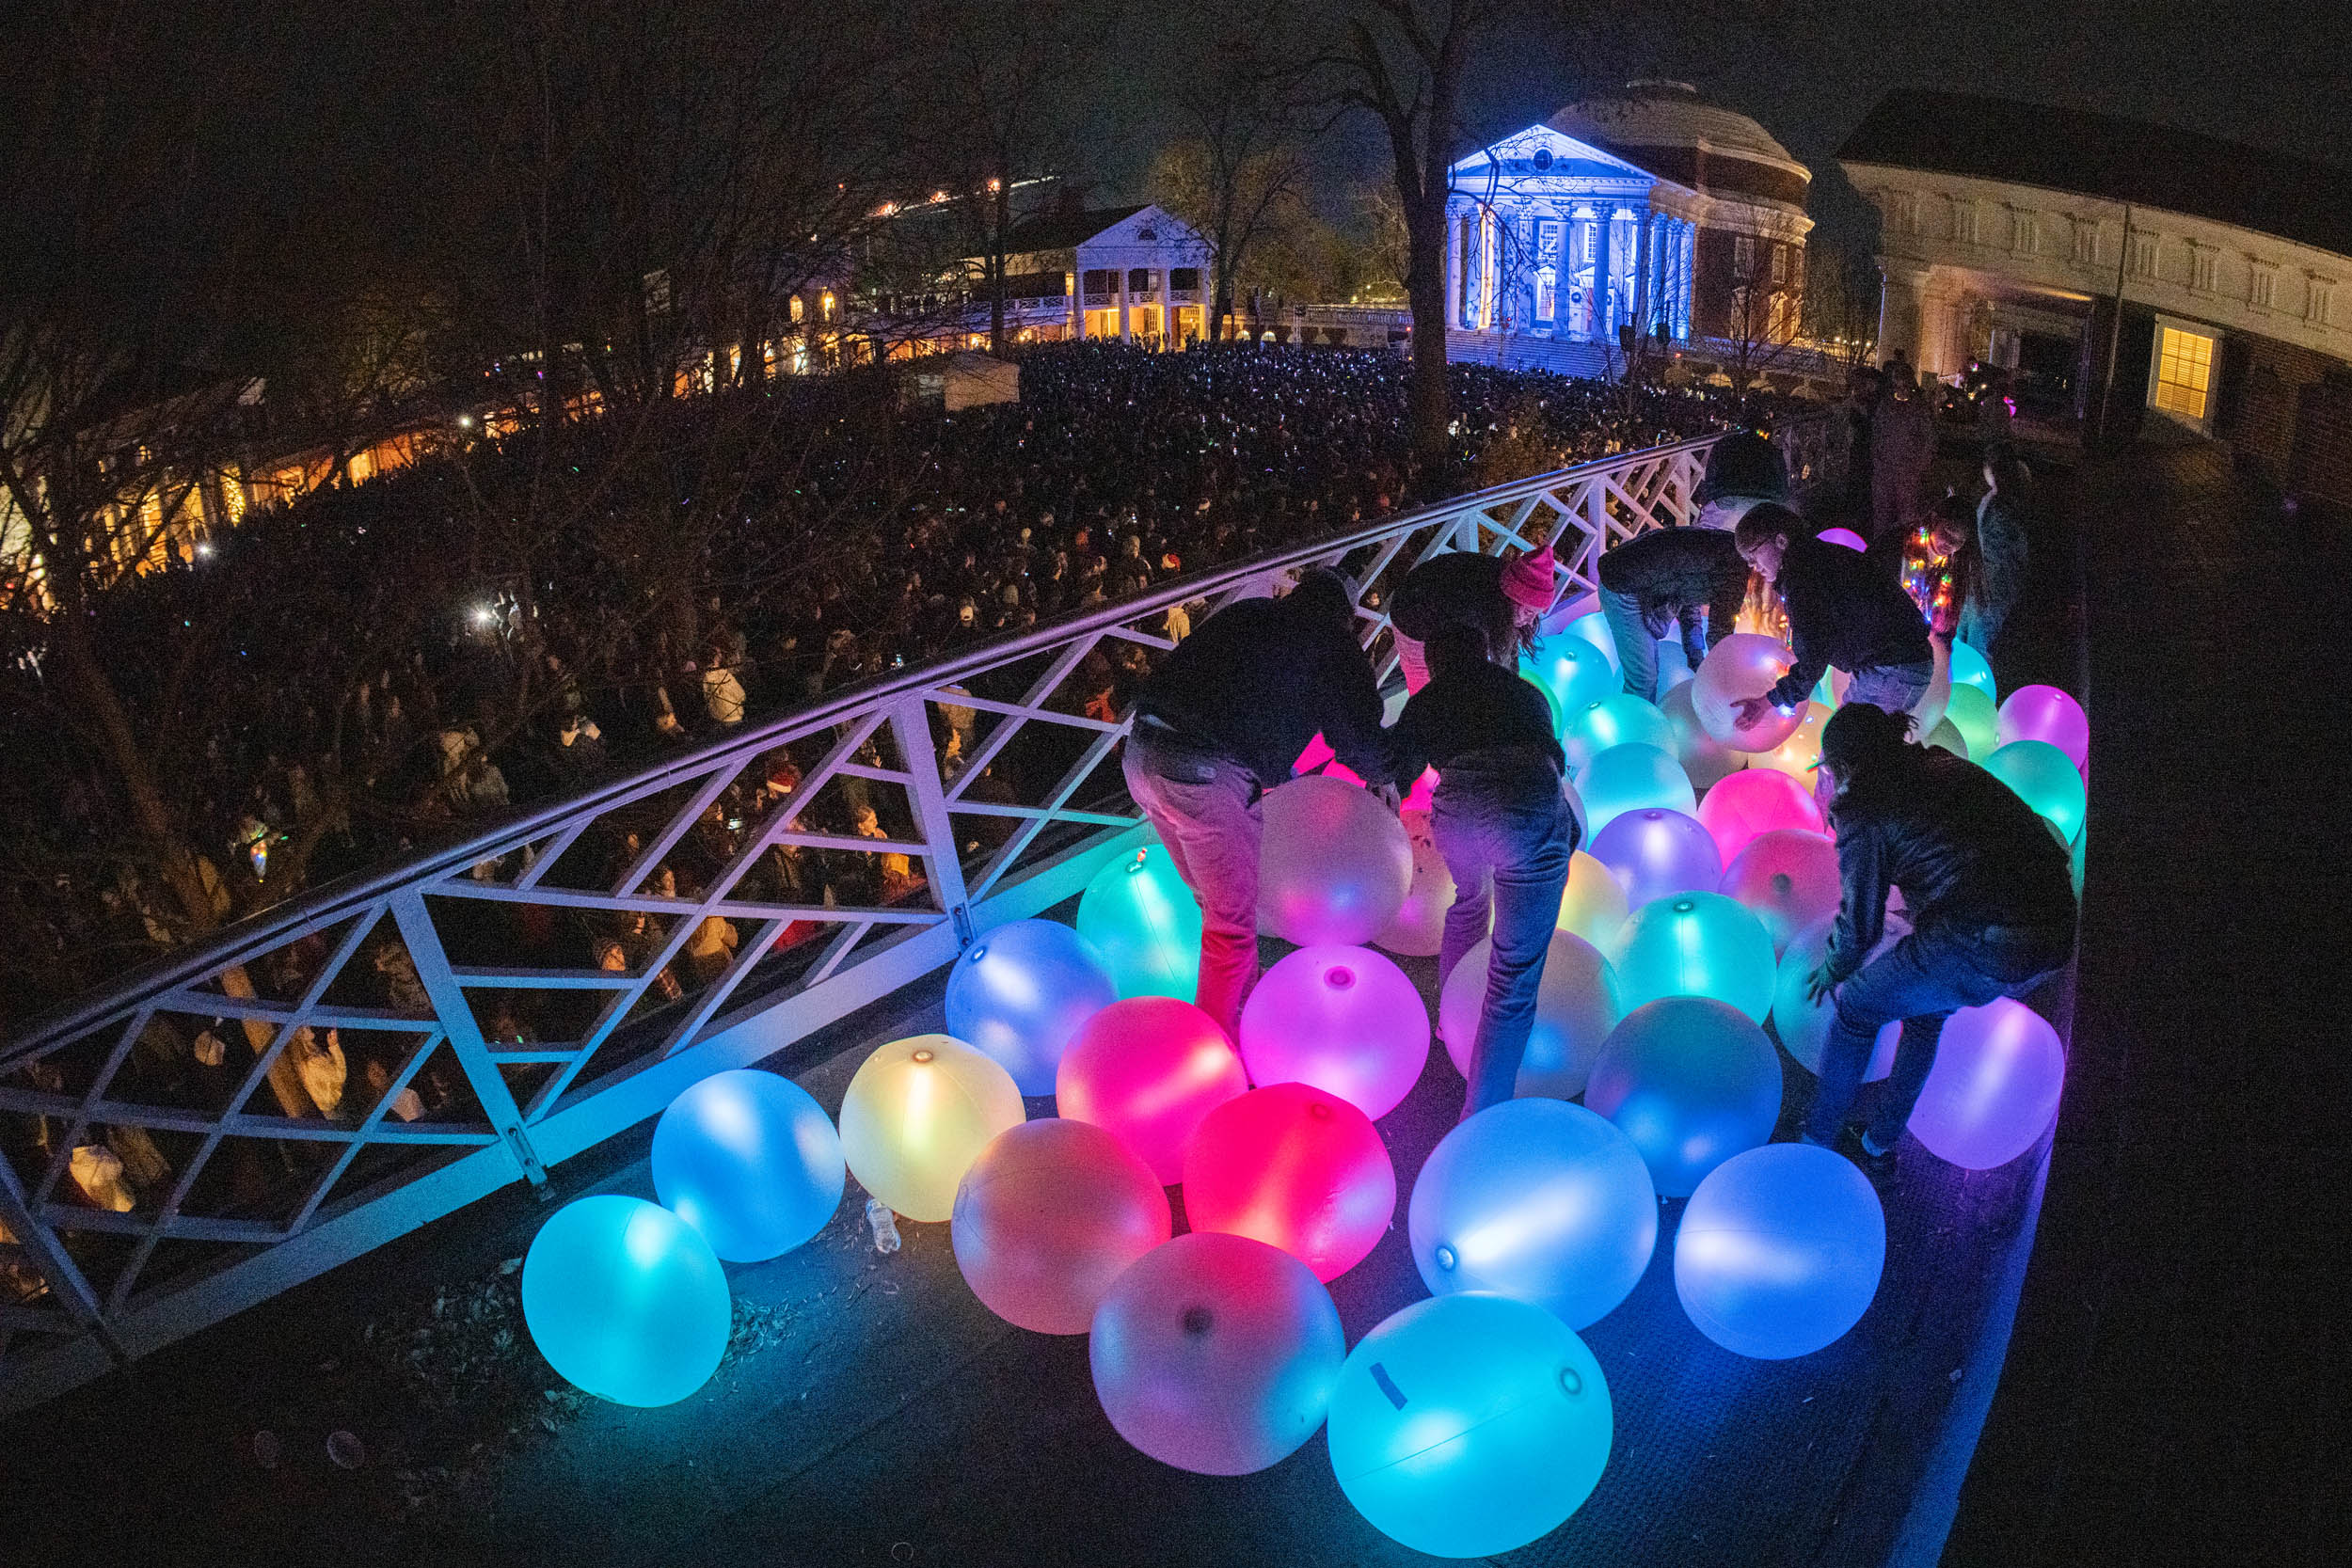 The theme of 2021’s Lighting of the Lawn was “Brighter Than Ever,” chosen to reflect the feeling of emerging after a long, dark period. (Photo by Sanjay Suchak, University Communications)